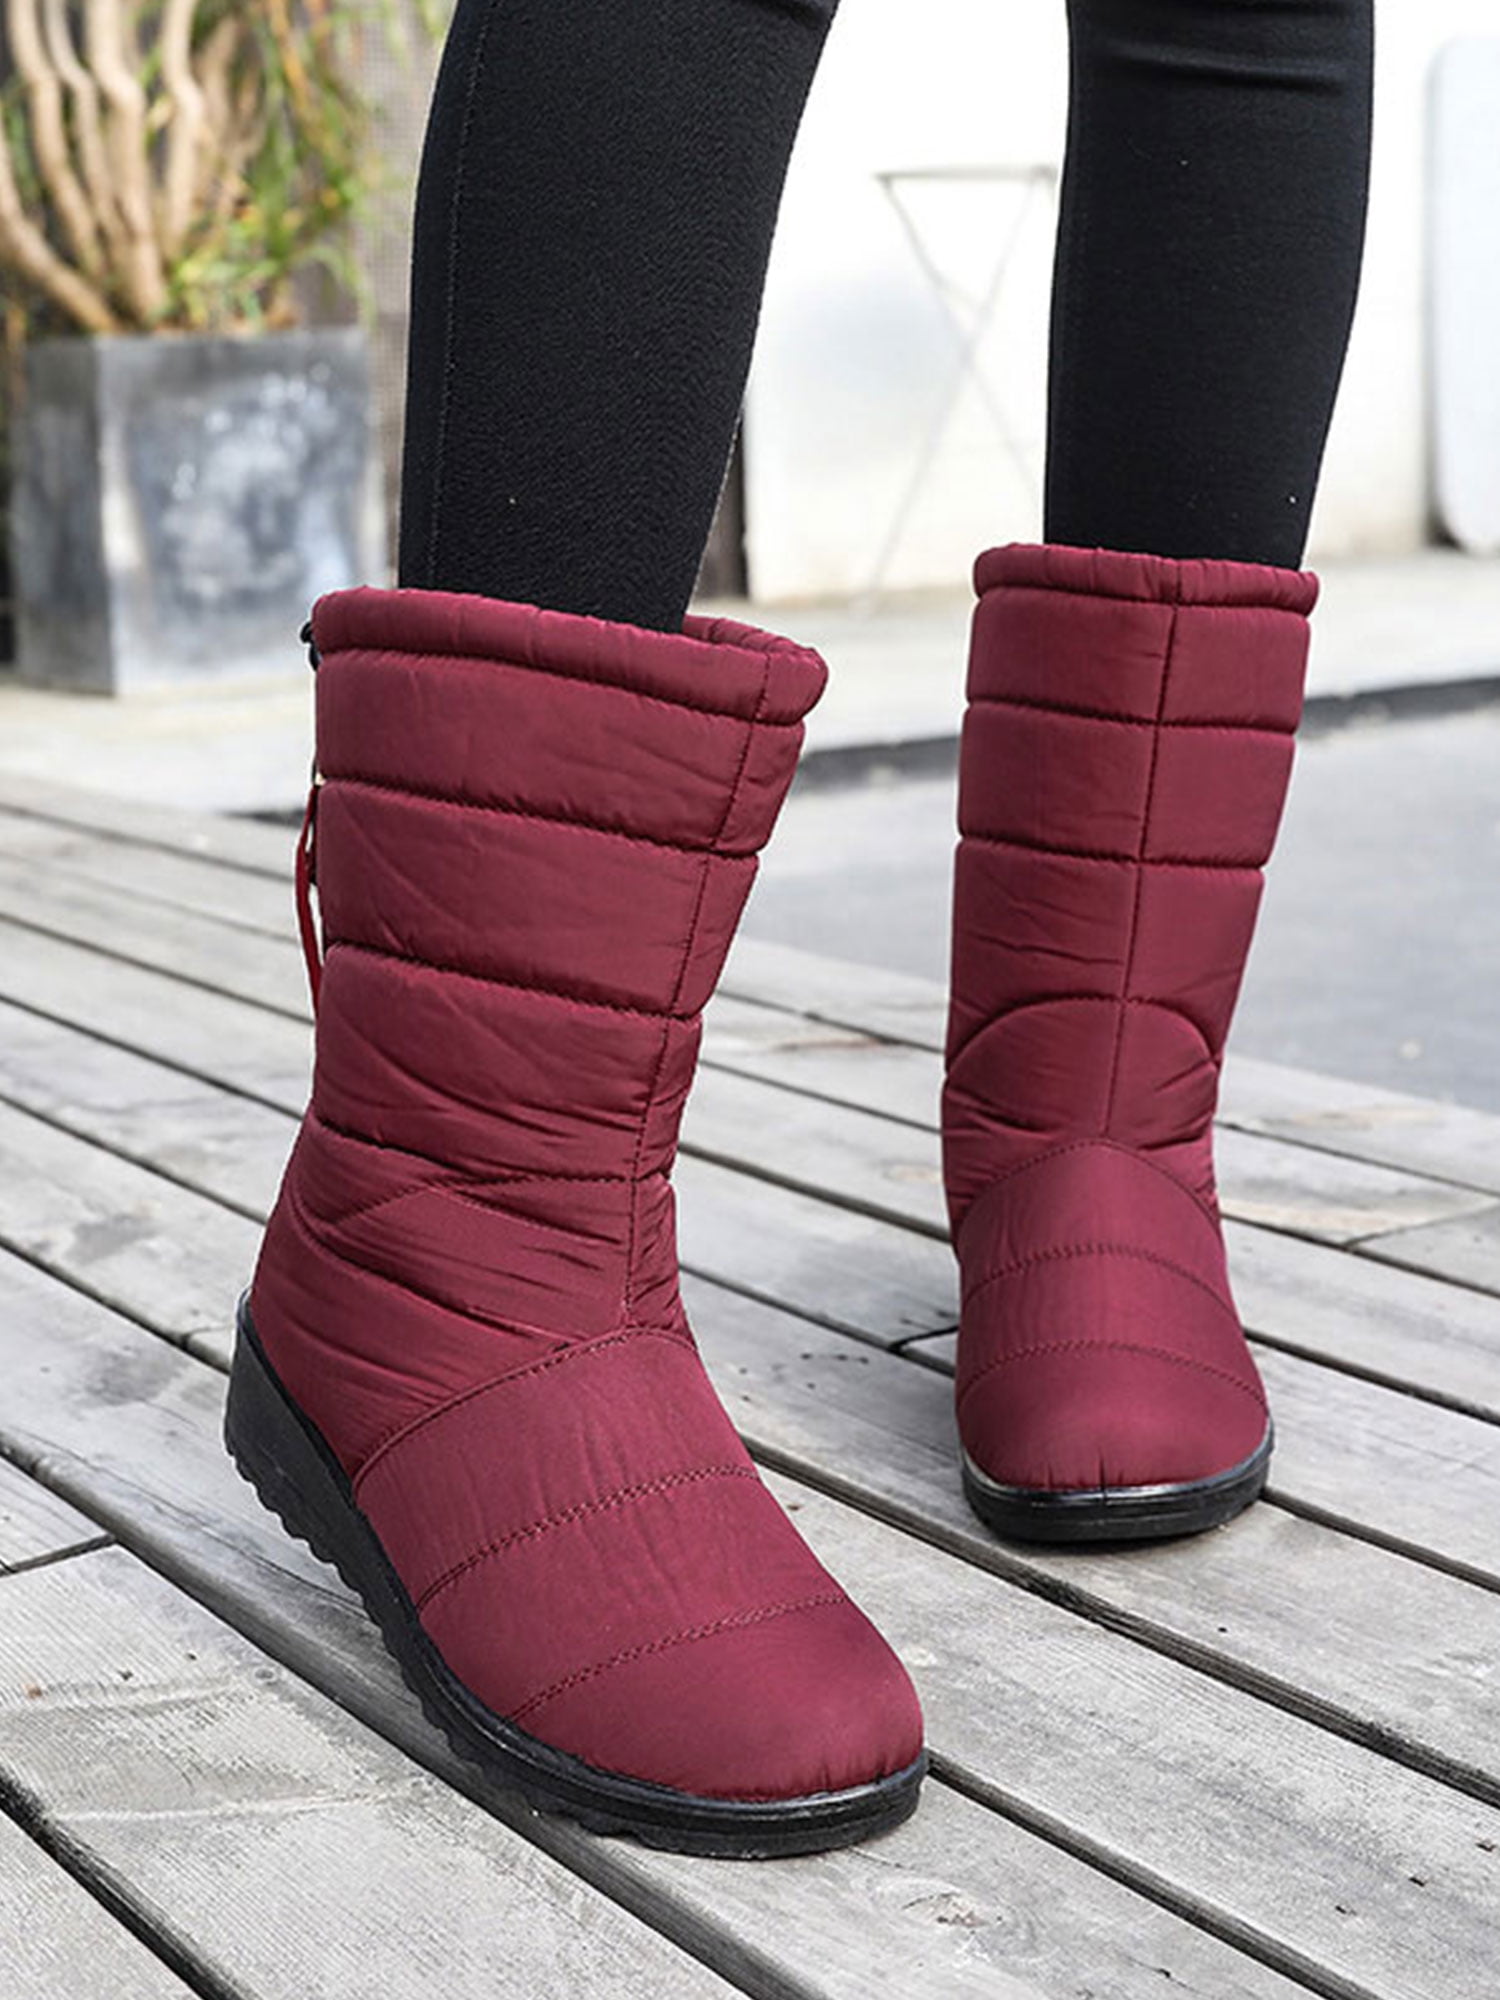 Big Incisors Women Boots Warm Fur Ankle Boots for Women Snow Boots Female Winter Shoes Women Flats Booties,Pink,6 